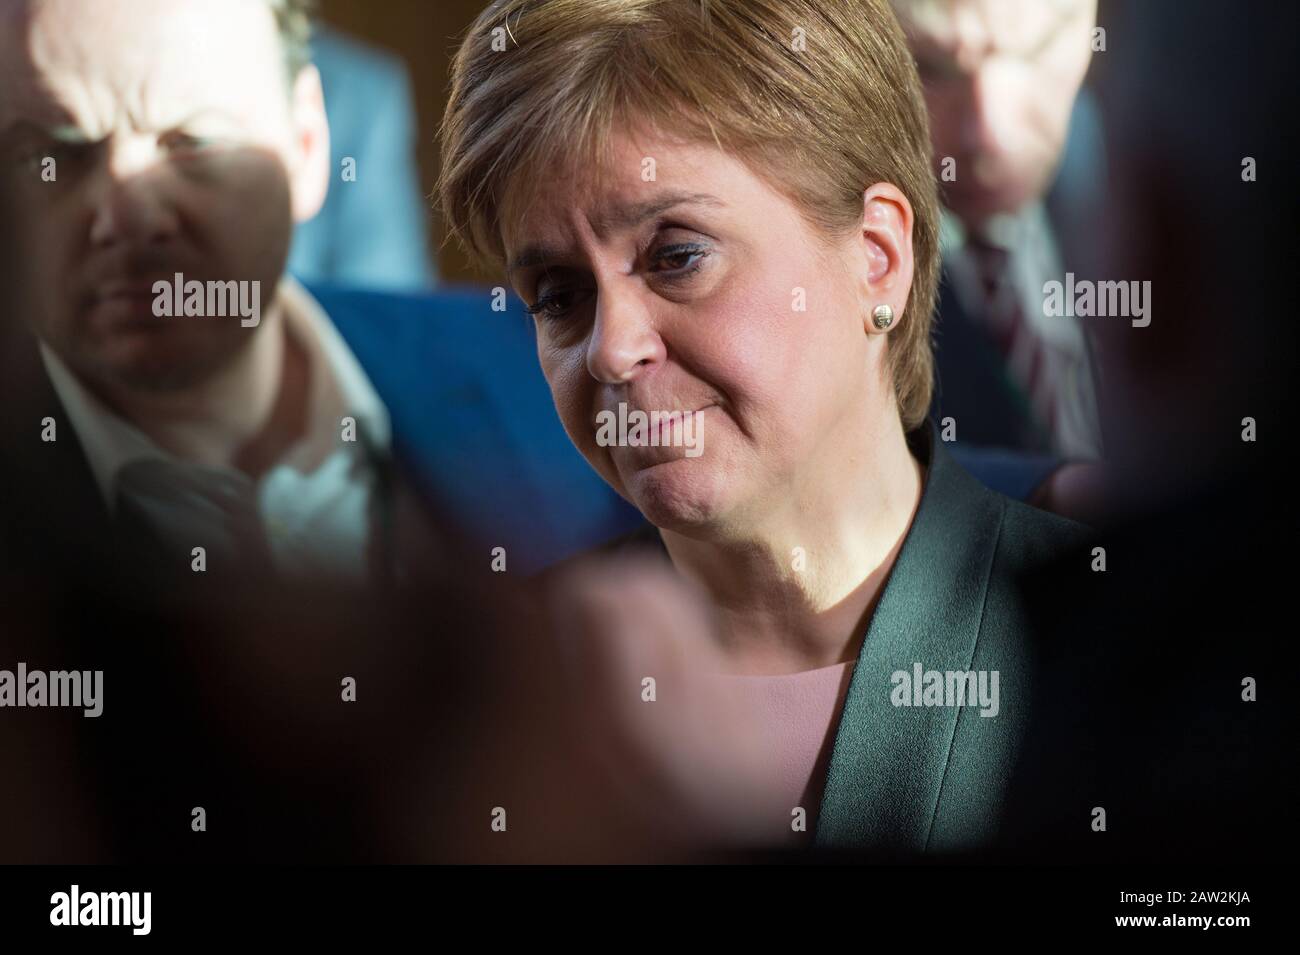 Edinburgh, UK. 6th Feb, 2020. Pictured: Nicola Sturgeon MSP - First Minister of Scotland and Leader of the Scottish National Party (SNP). The First Minister, Nicola Sturgeon answers questions to an awaiting media pack after she emerges from the chamber from First Ministers Questions. Finance Minister Derek Mackay was due to unveil his budget, First Ministers Questions was marred by last nights resignation of Finance Minister. Kate Forbes will now be delivering the budget later on this afternoon. Credit: Colin Fisher/Alamy Live News Stock Photo